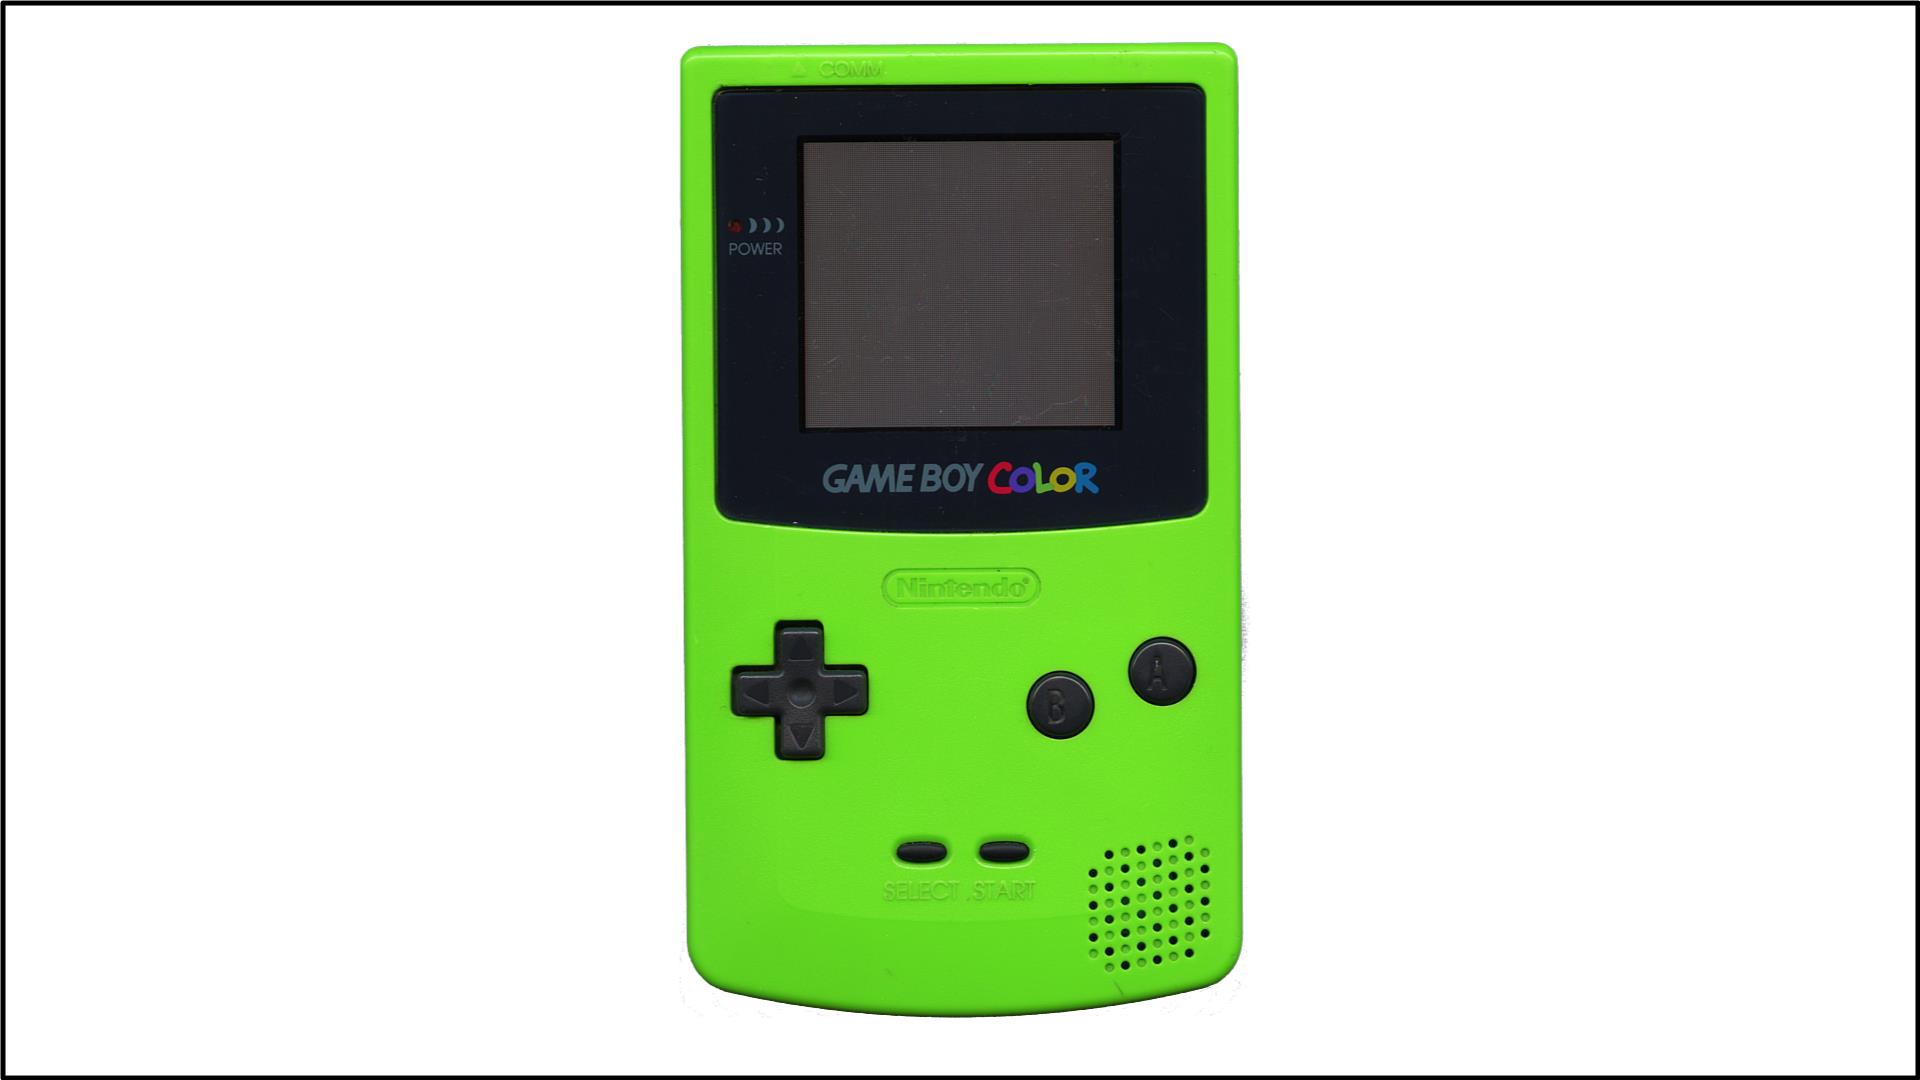 Game Boy & Game Boy Color Best Selling Handheld Consoles